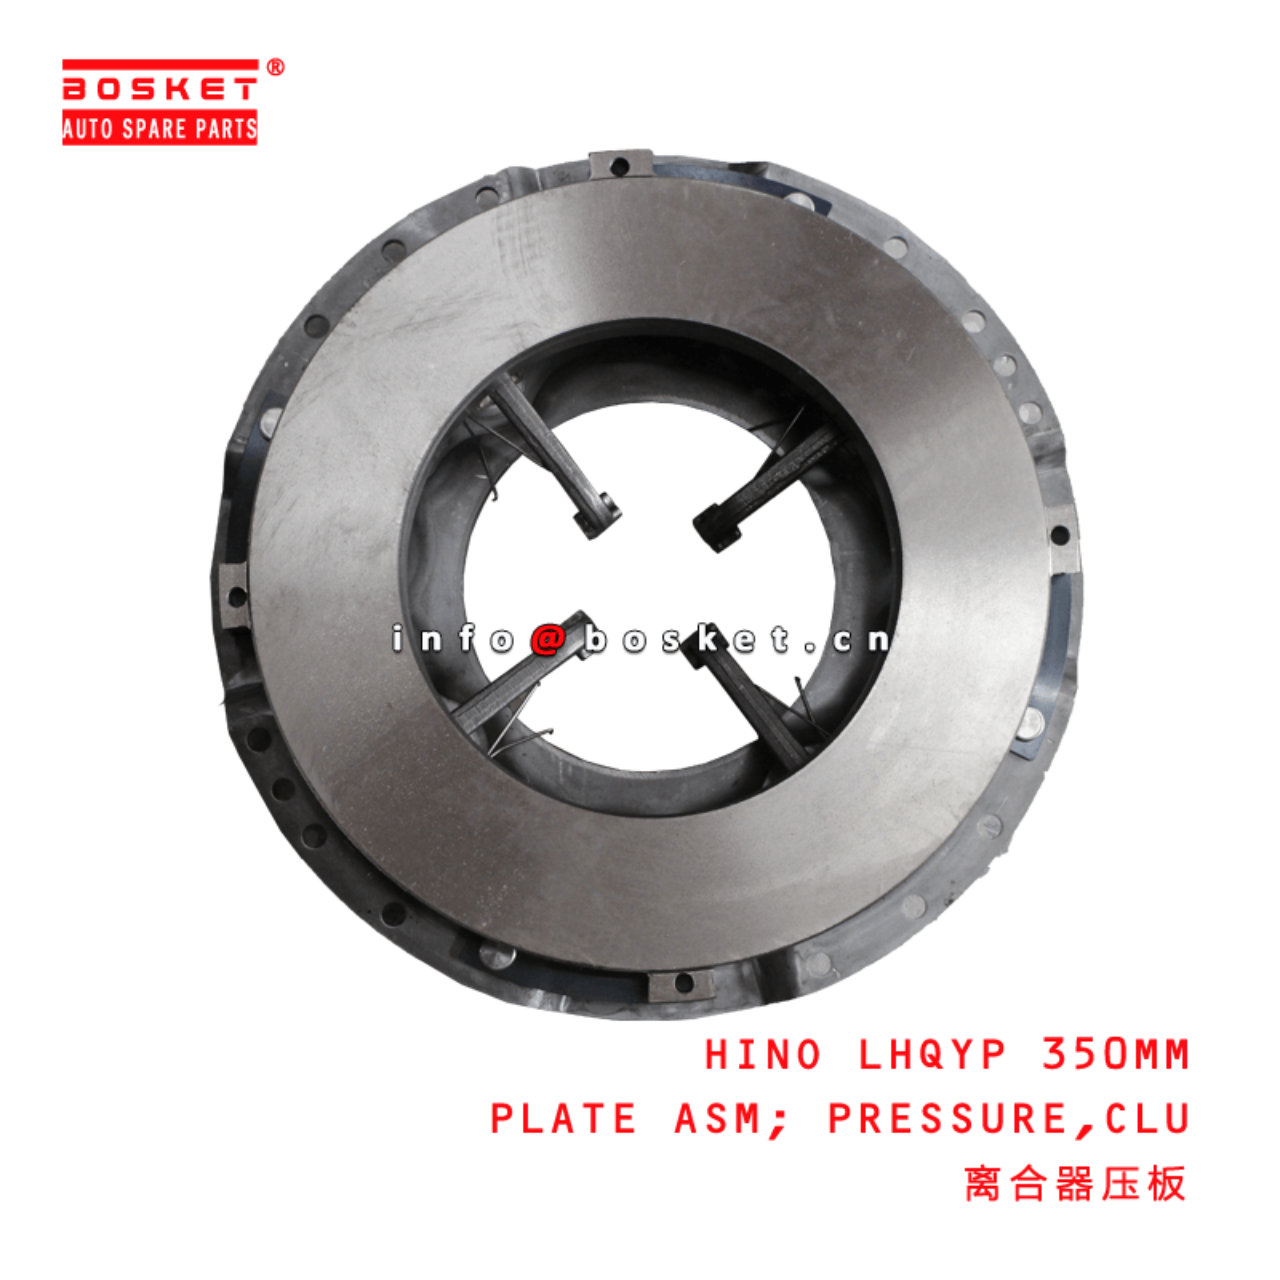  HINO LHQYP 350MM Clutch Pressure Plate Assembly Suitable For HINO 